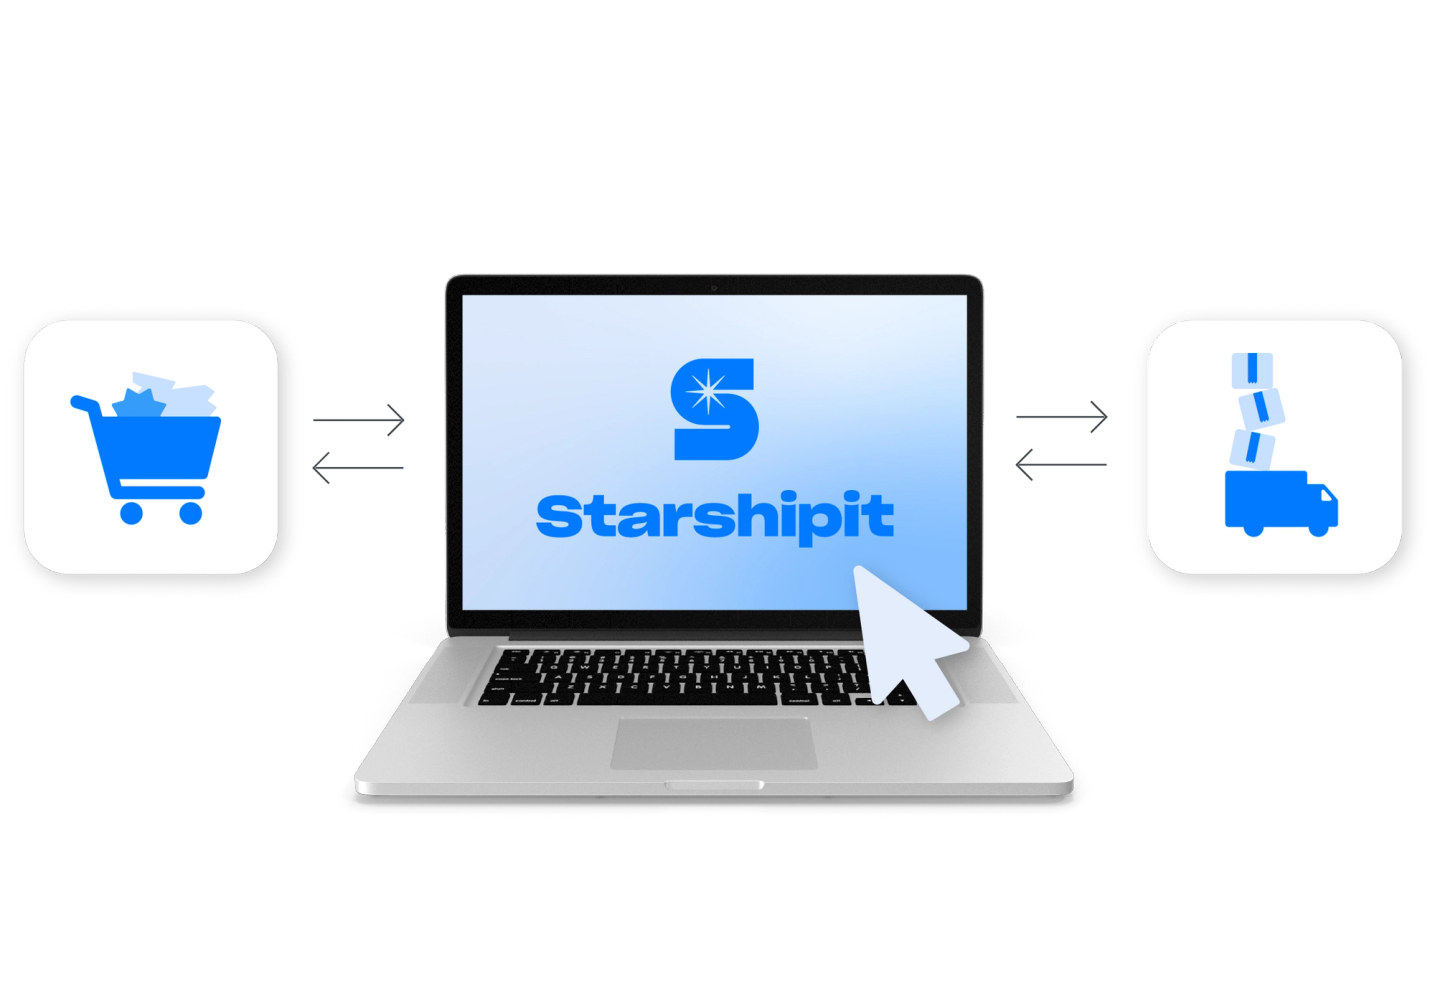 Starshipit's write-back feature let's you automatically update the order status and tracking number in the source platform.